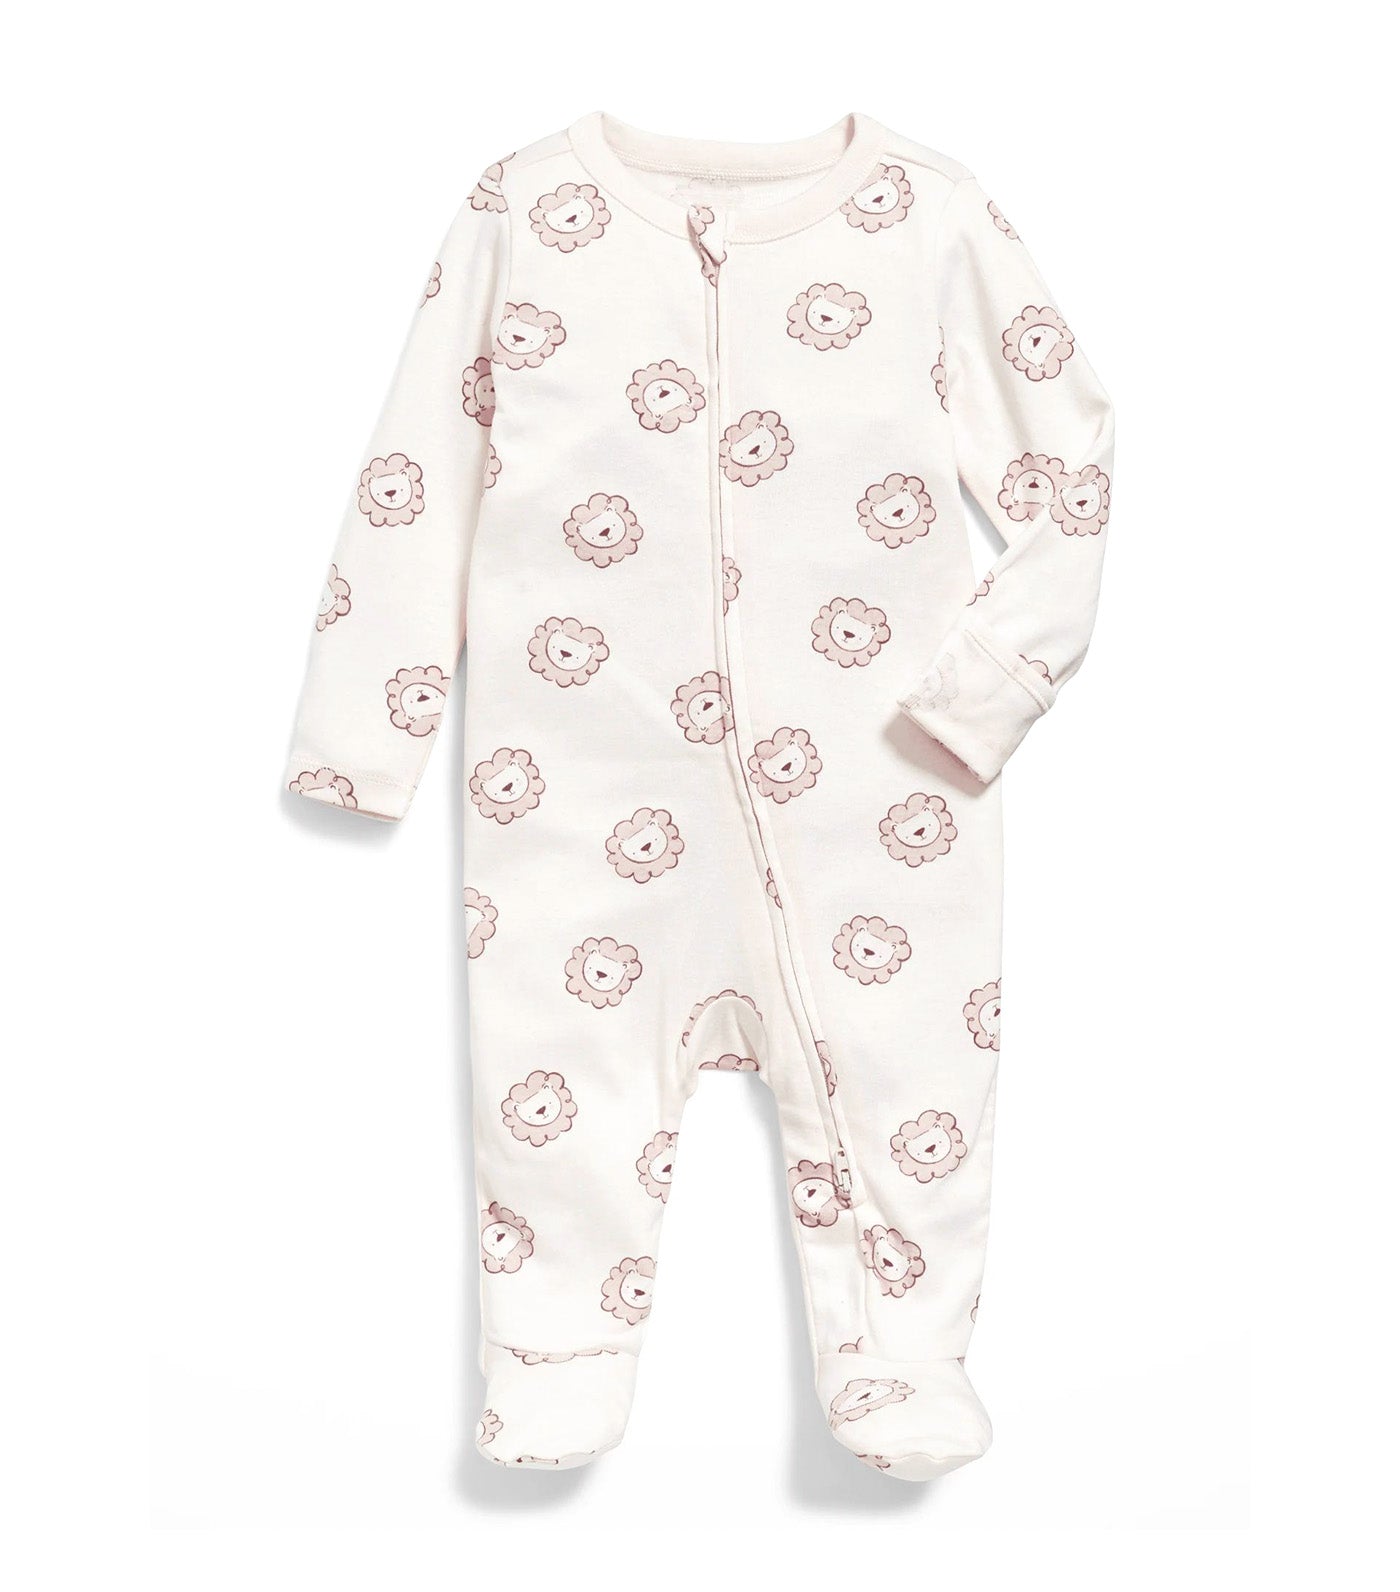 Unisex 2-Way-Zip Sleep & Play Printed Footed One-Piece for Baby Lion Print